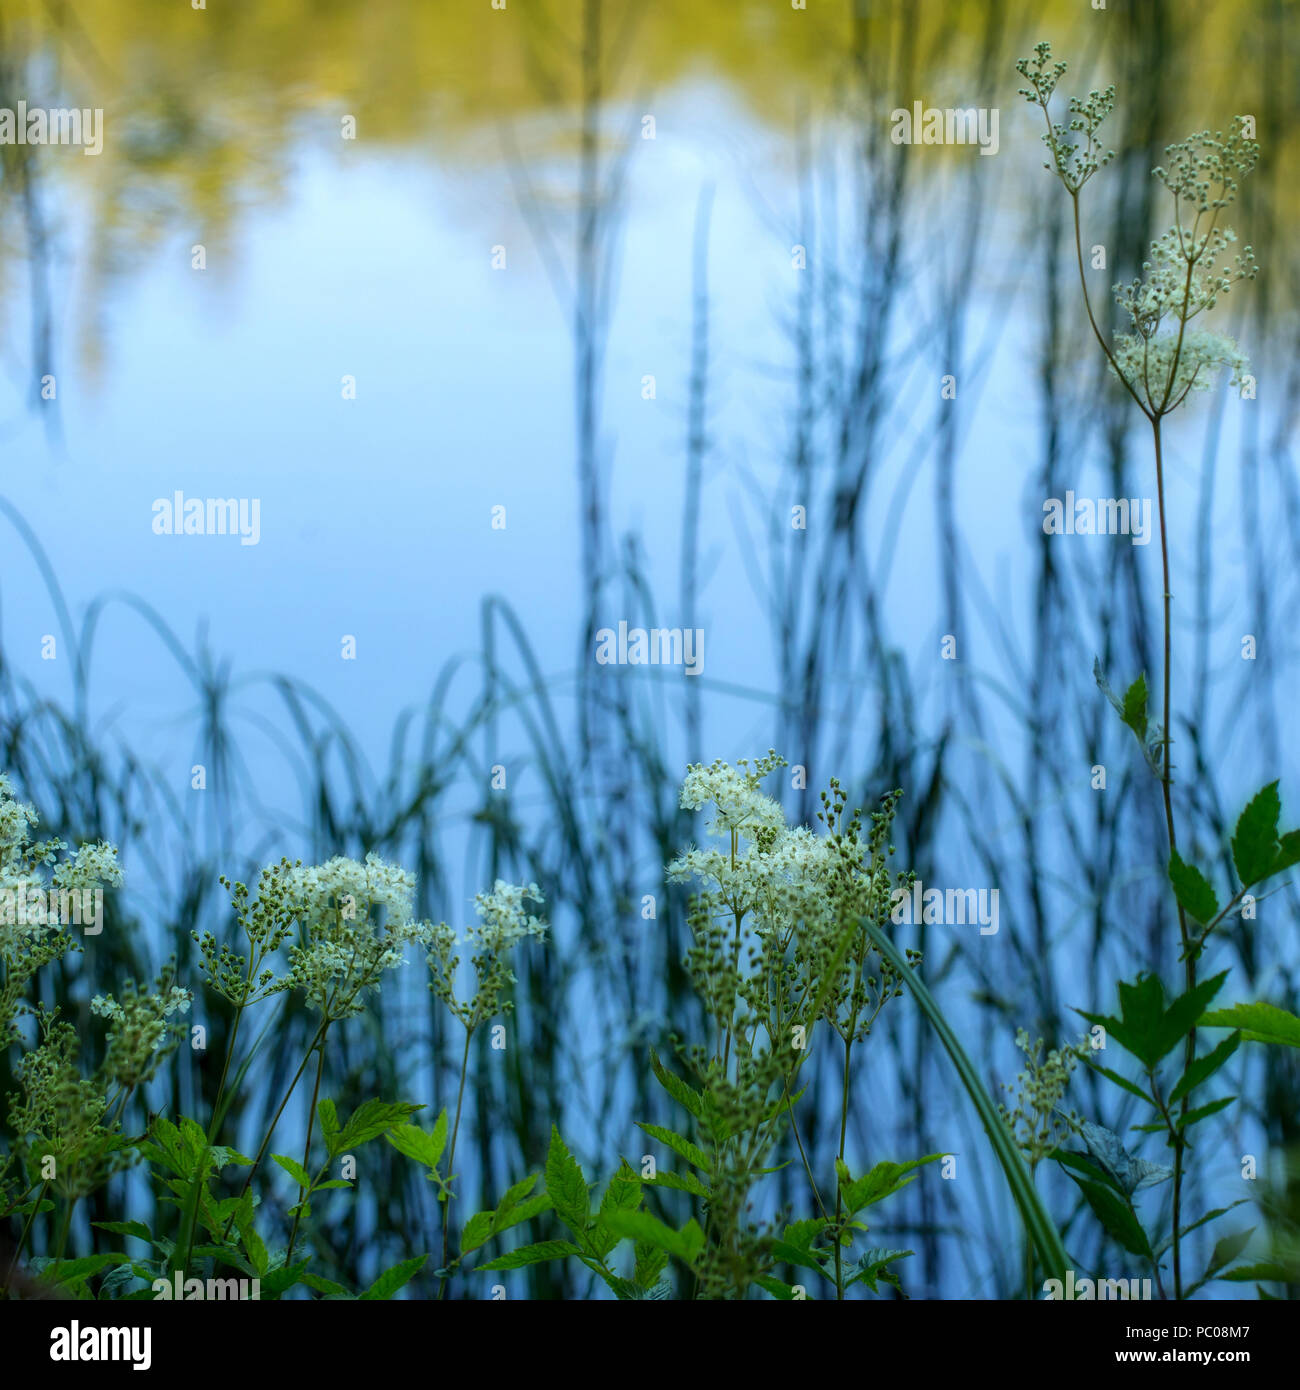 Nature abstract background, plants at lakeside with reflection. Includes meadowsweet, Filipendula ulmaria Stock Photo